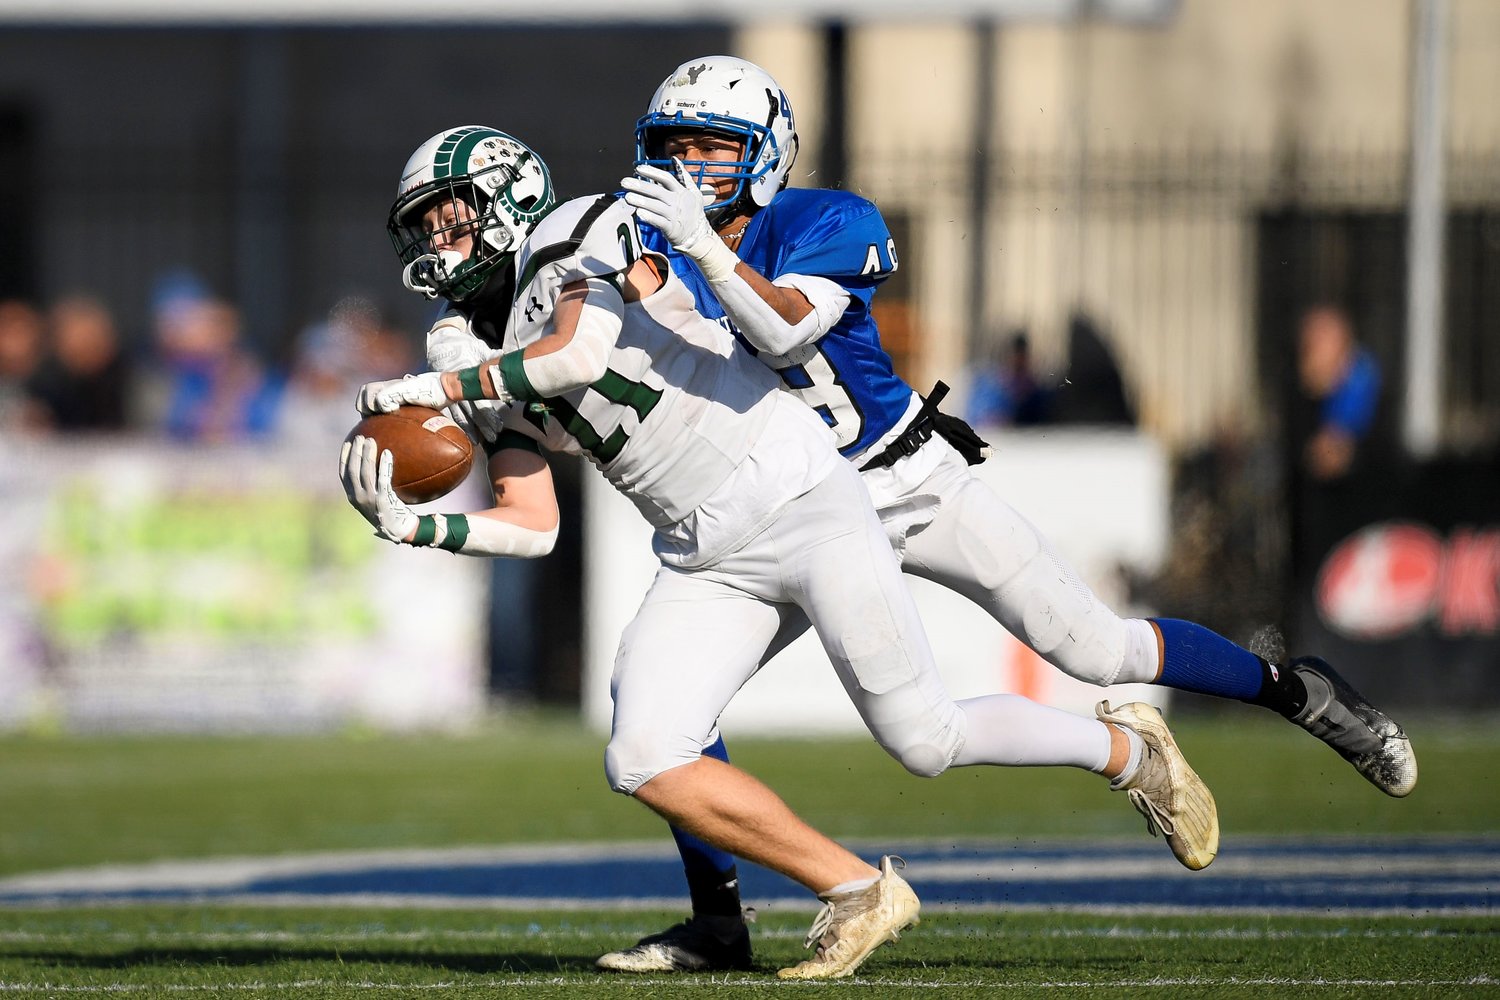 Pennridge’s Connor Lelii catches a pass out of the backfield for a short gain.